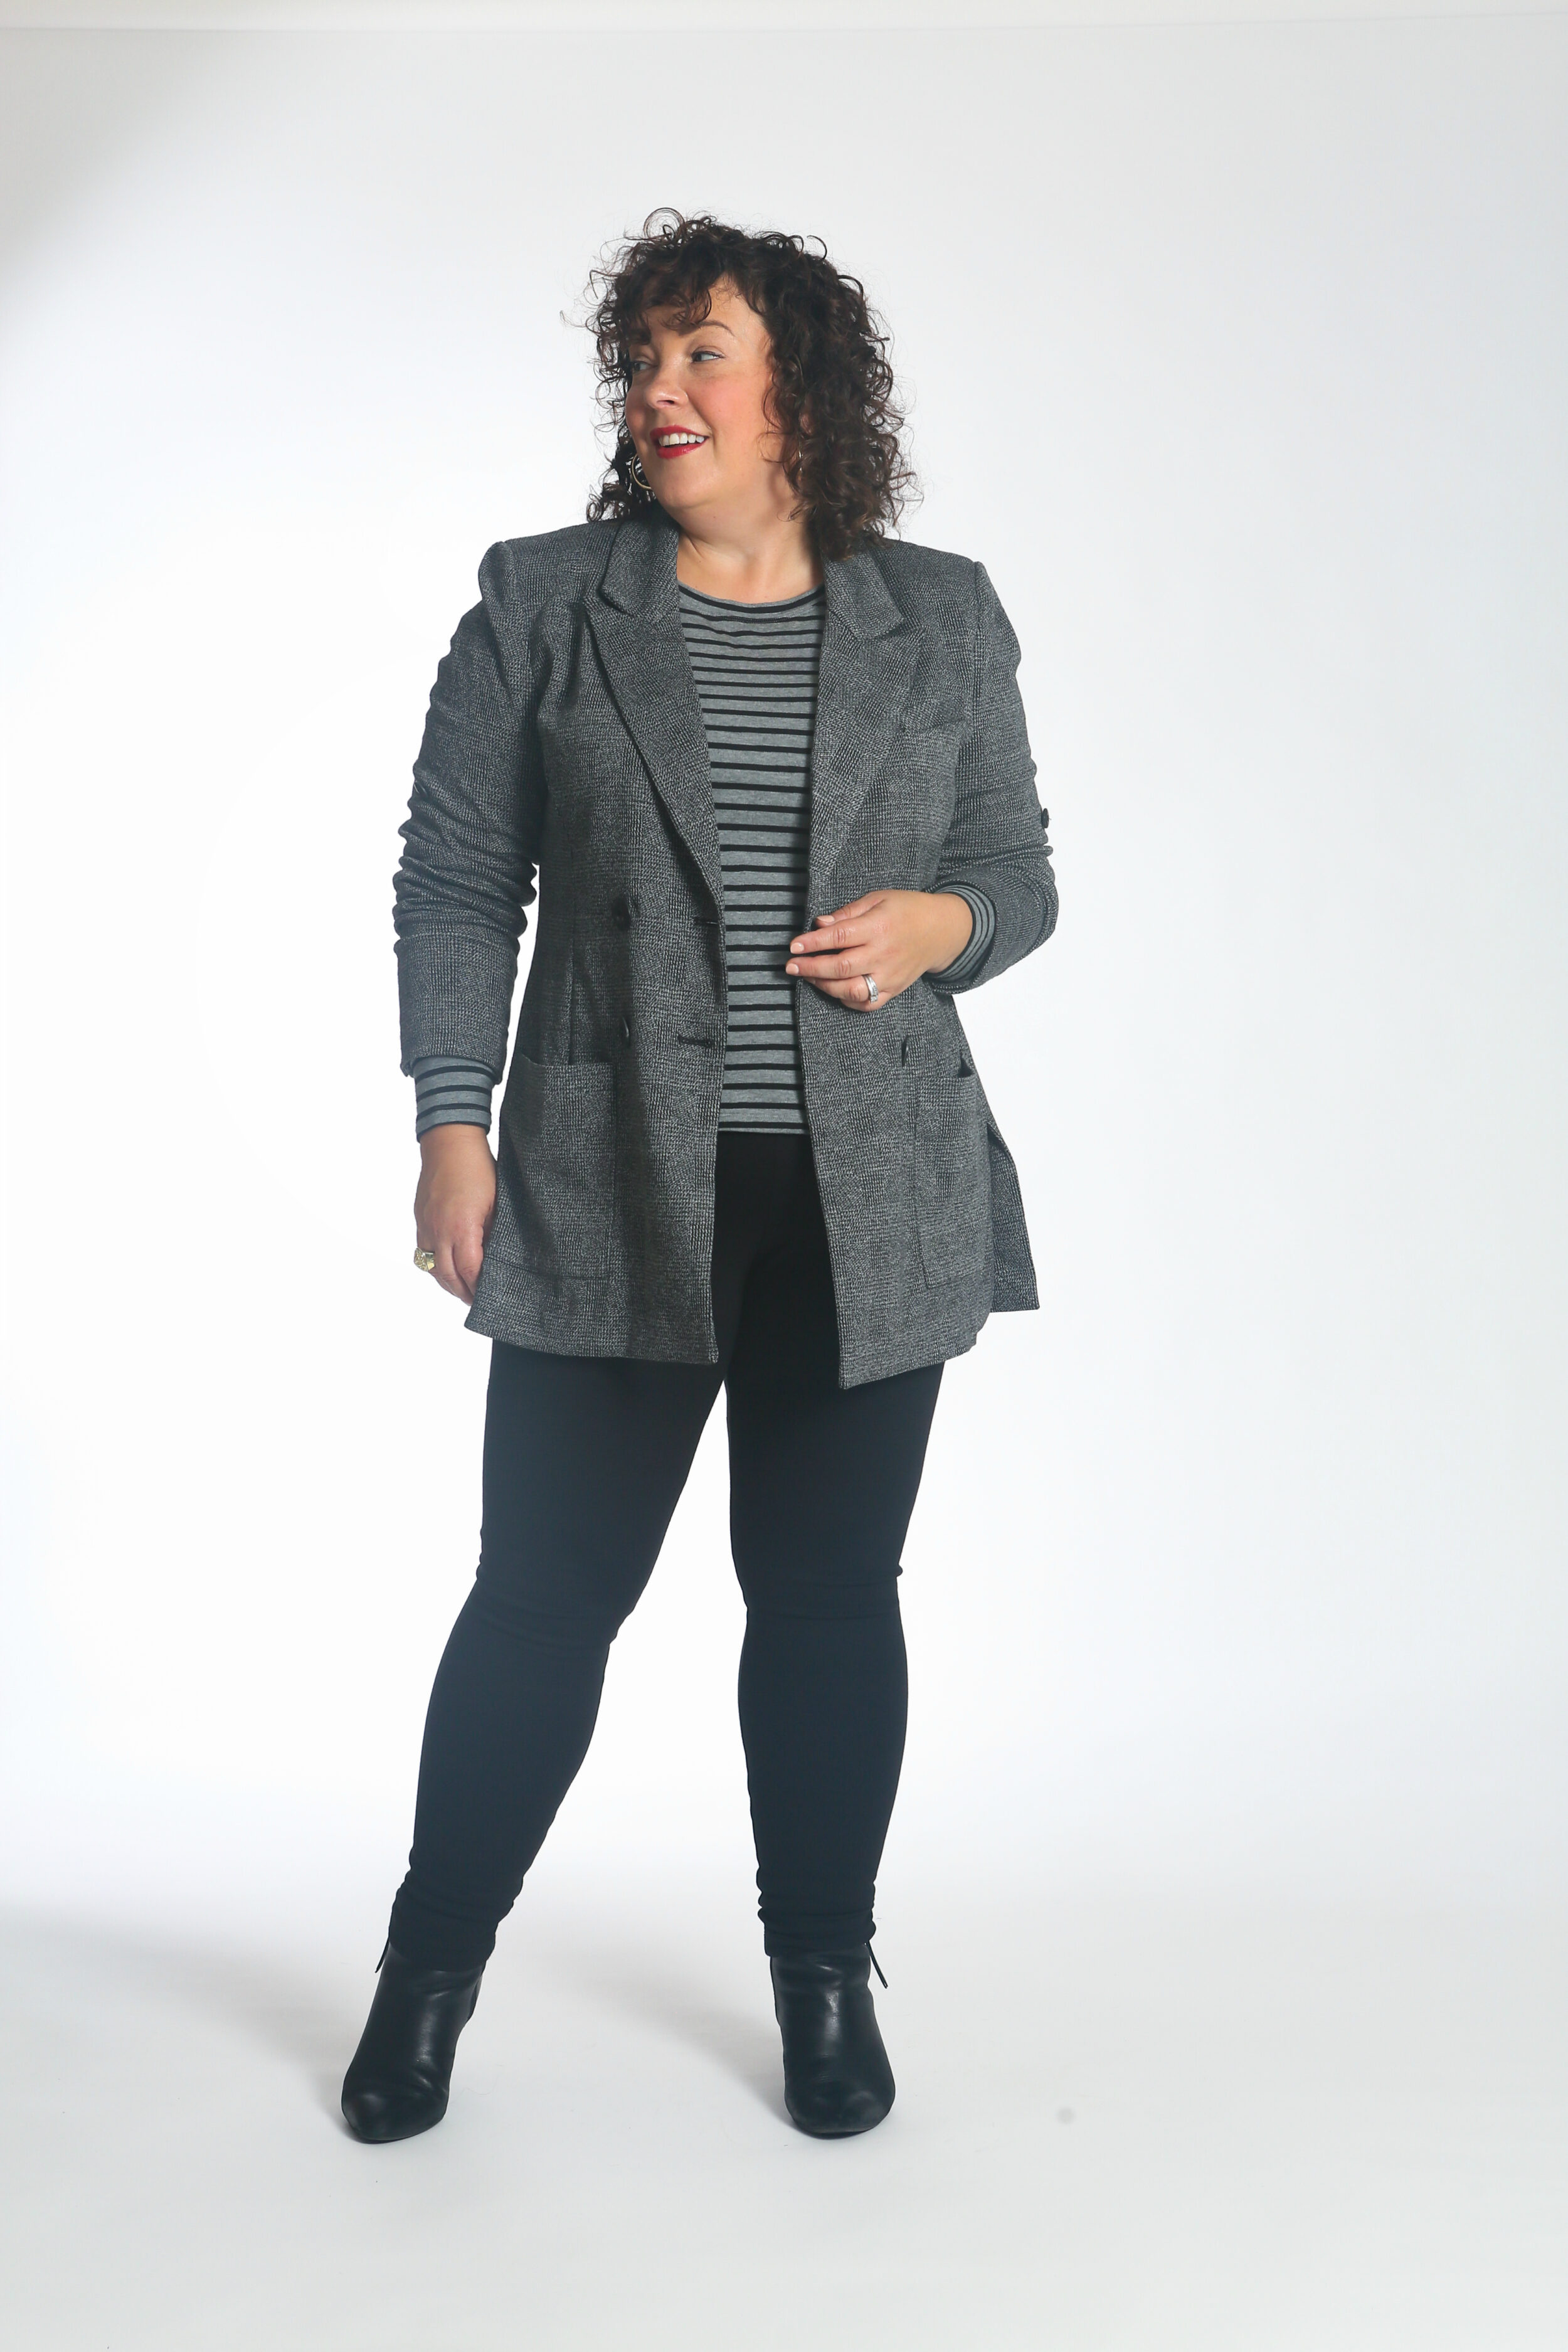 Wardrobe Oxygen in the cabi Pivot Fitted tee over the Bond Blazer and High Legging.